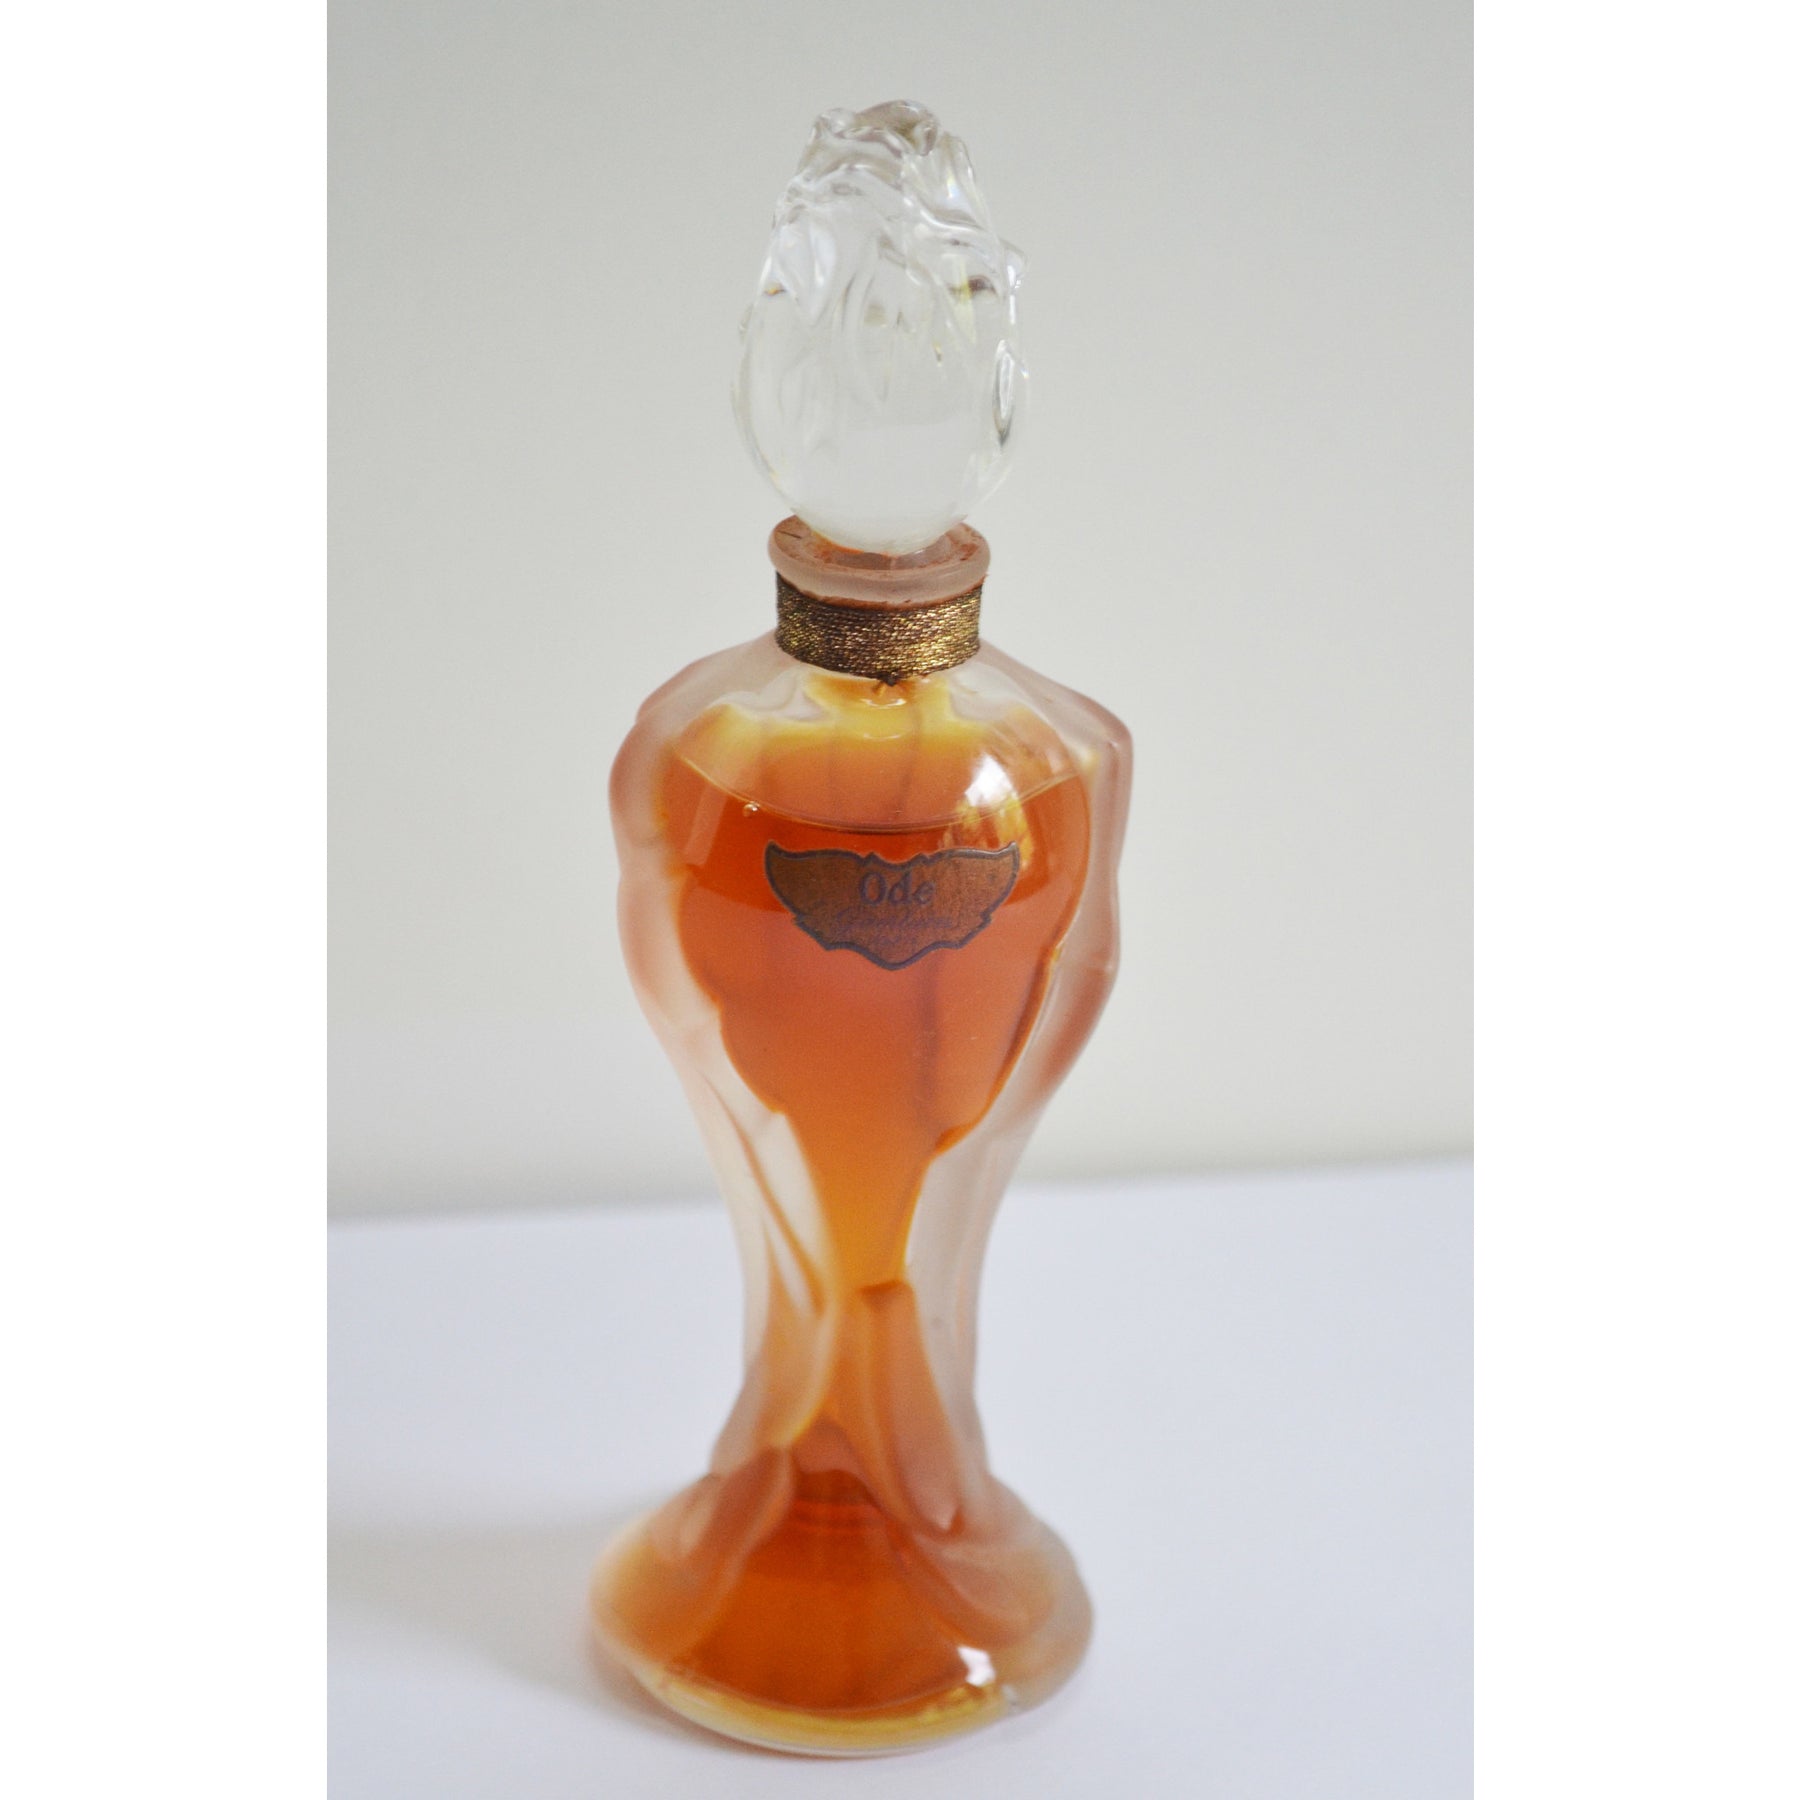 Vintage Ode Perfume Baccarat Bottle By Guerlain – Quirky Finds